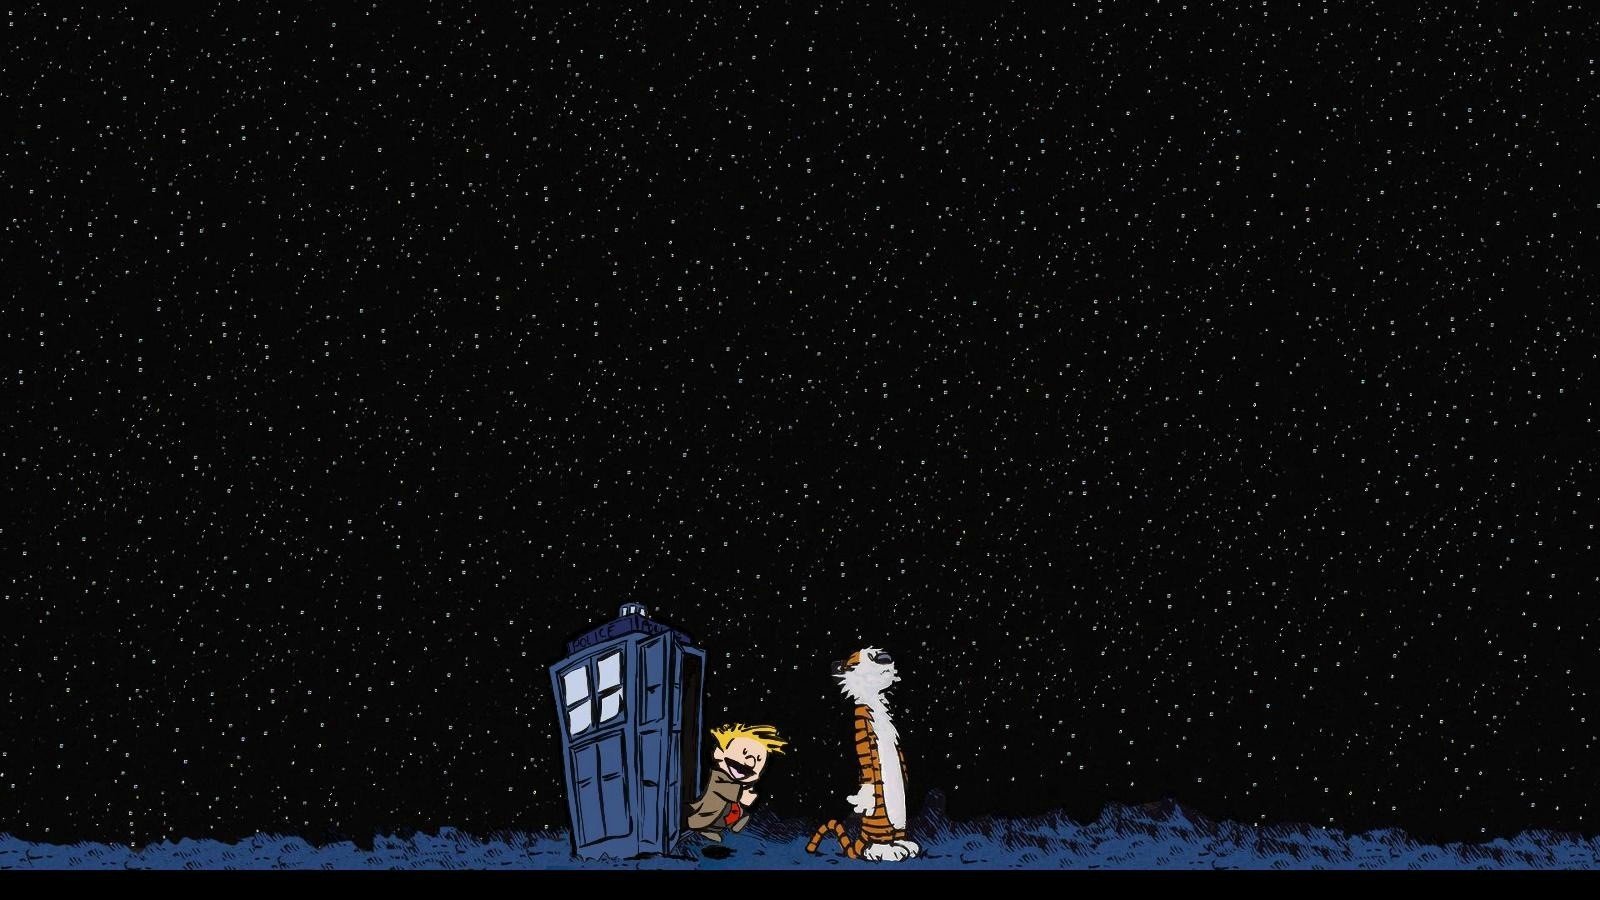 night, Stars, Tardis, Calvin, And, Hobbes, Doctor, Who, Crossovers, Skyscapes Wallpaper